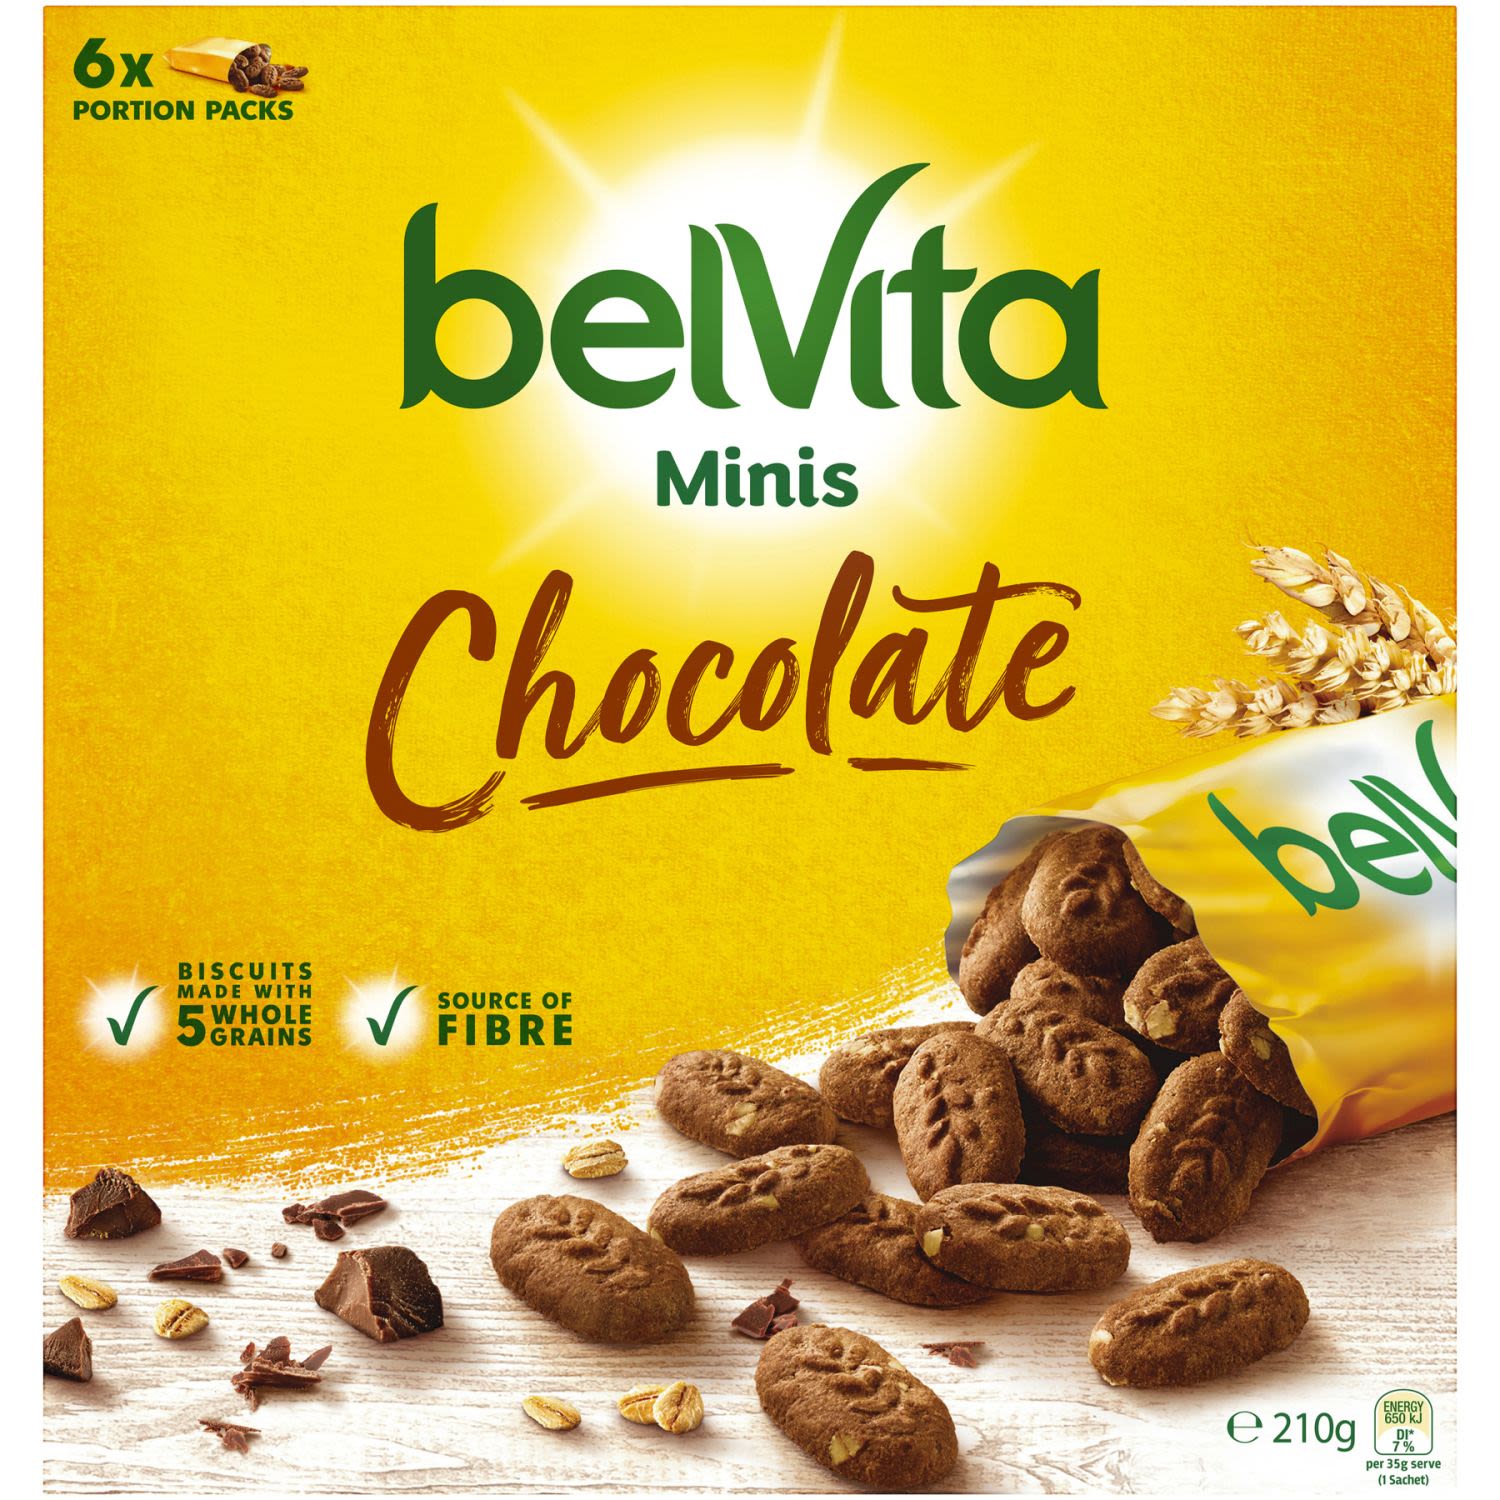 Brigthen your morning with...
belVita Minis

These delicious little biscuit bites are gently baked with 5 wholegrains providing you with a source of fibre with no artificial colours or flavours. 
Blended together with great tasting ingredients like cocoa and chocolate chips making them the feel-good, taste-good, mid-morning snack you're looking for enabling you to be the best you. Always.<br /> <br />